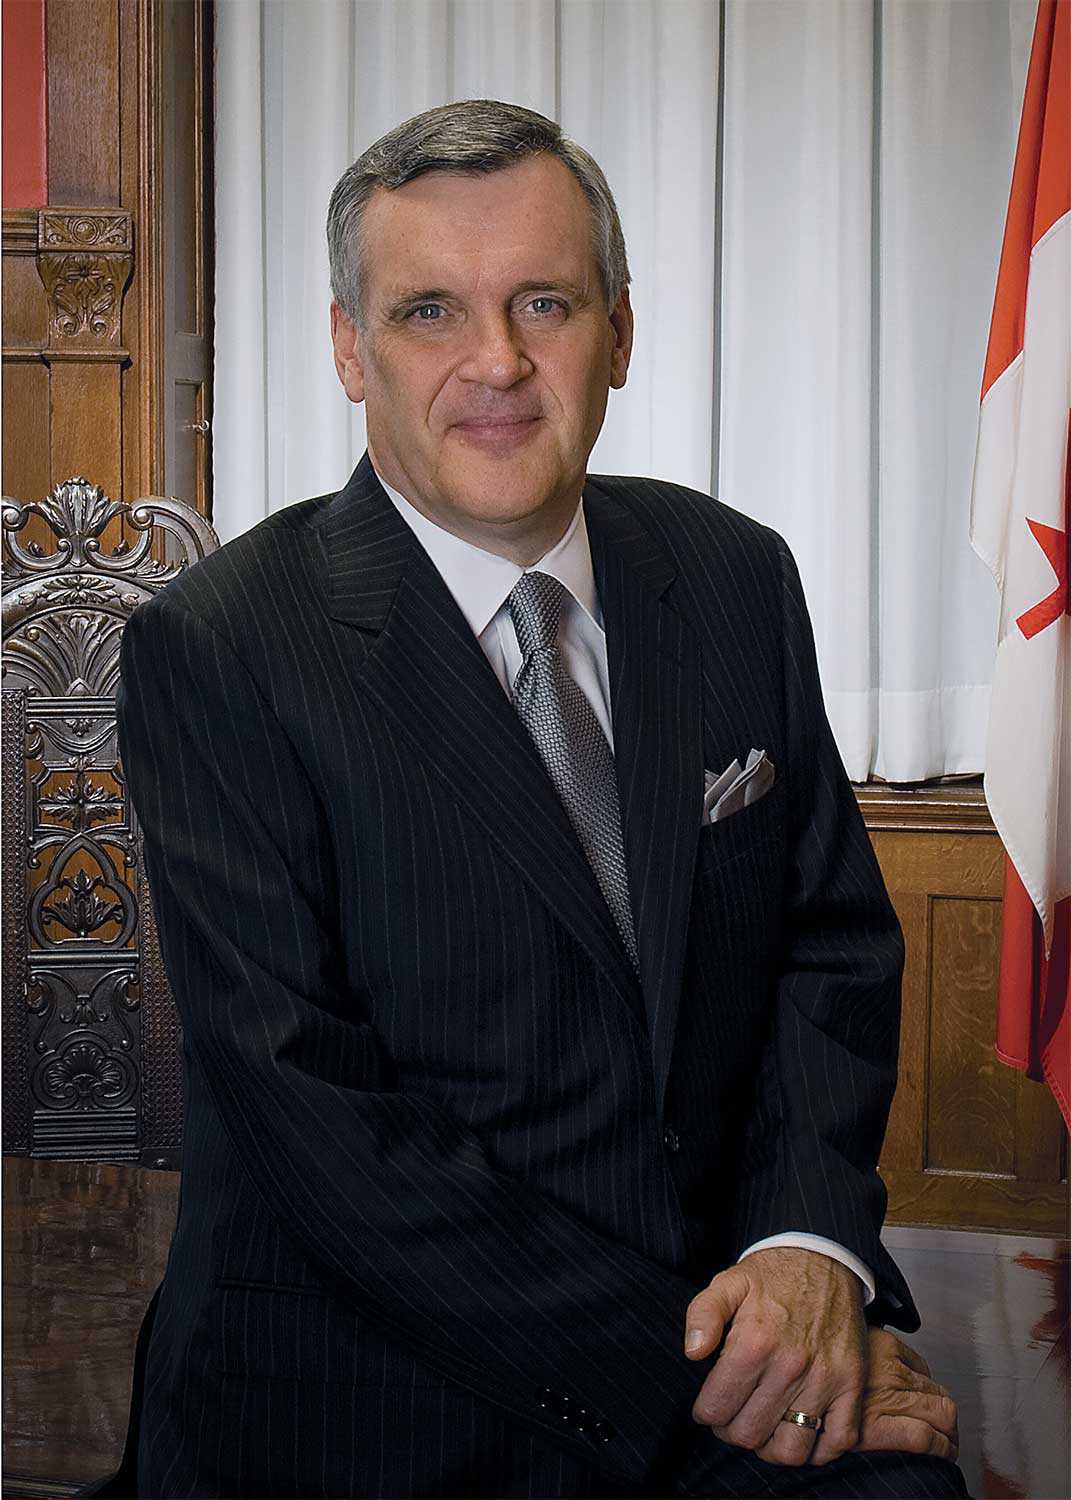 The Honourable David C. Onley, Lieutenant Governor of Ontario (Photo: Philippe Landreville, 2007)